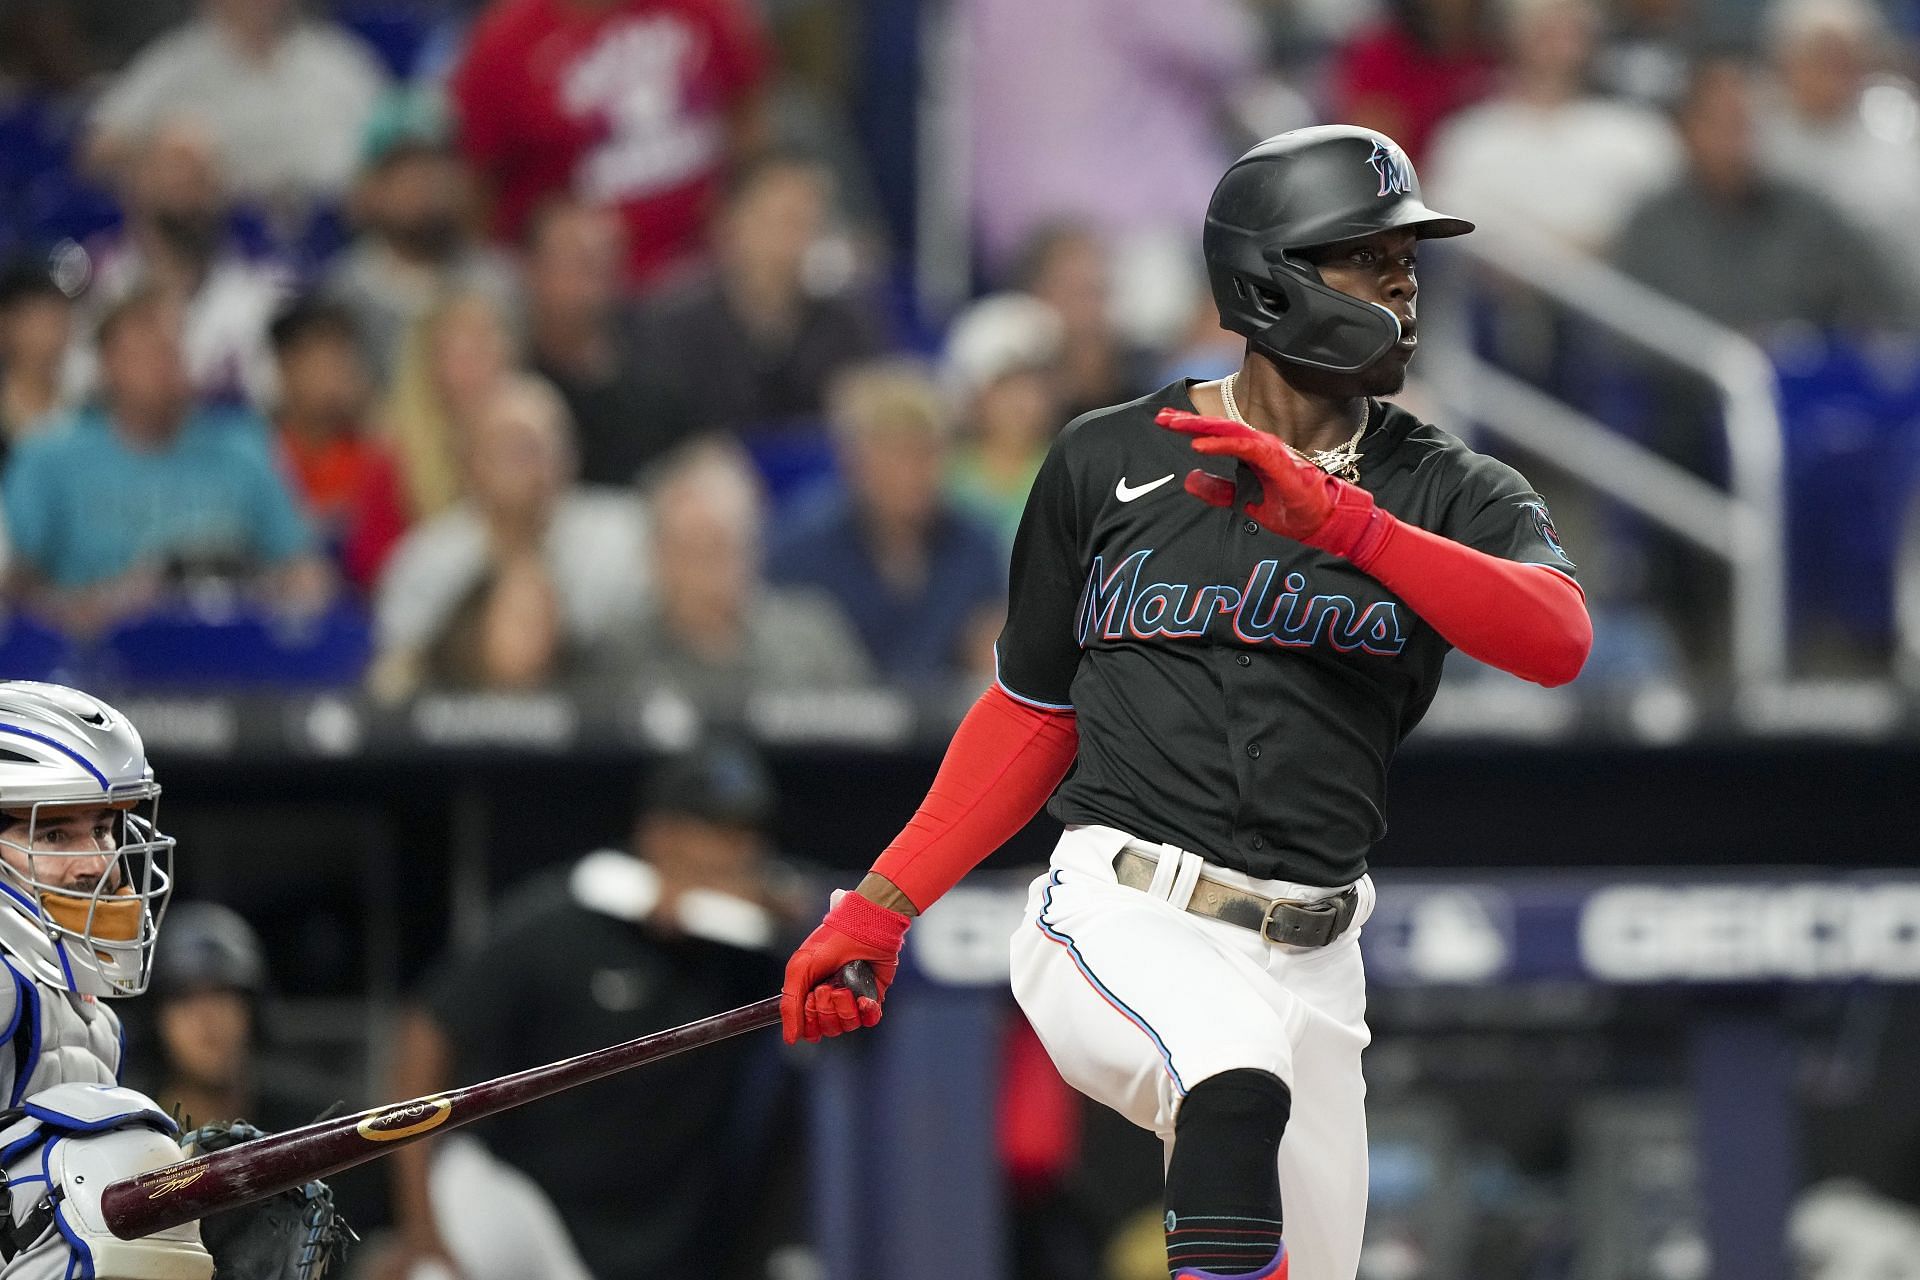 Jazz Chisholm Jr. leads the Marlins with 14 home runs.